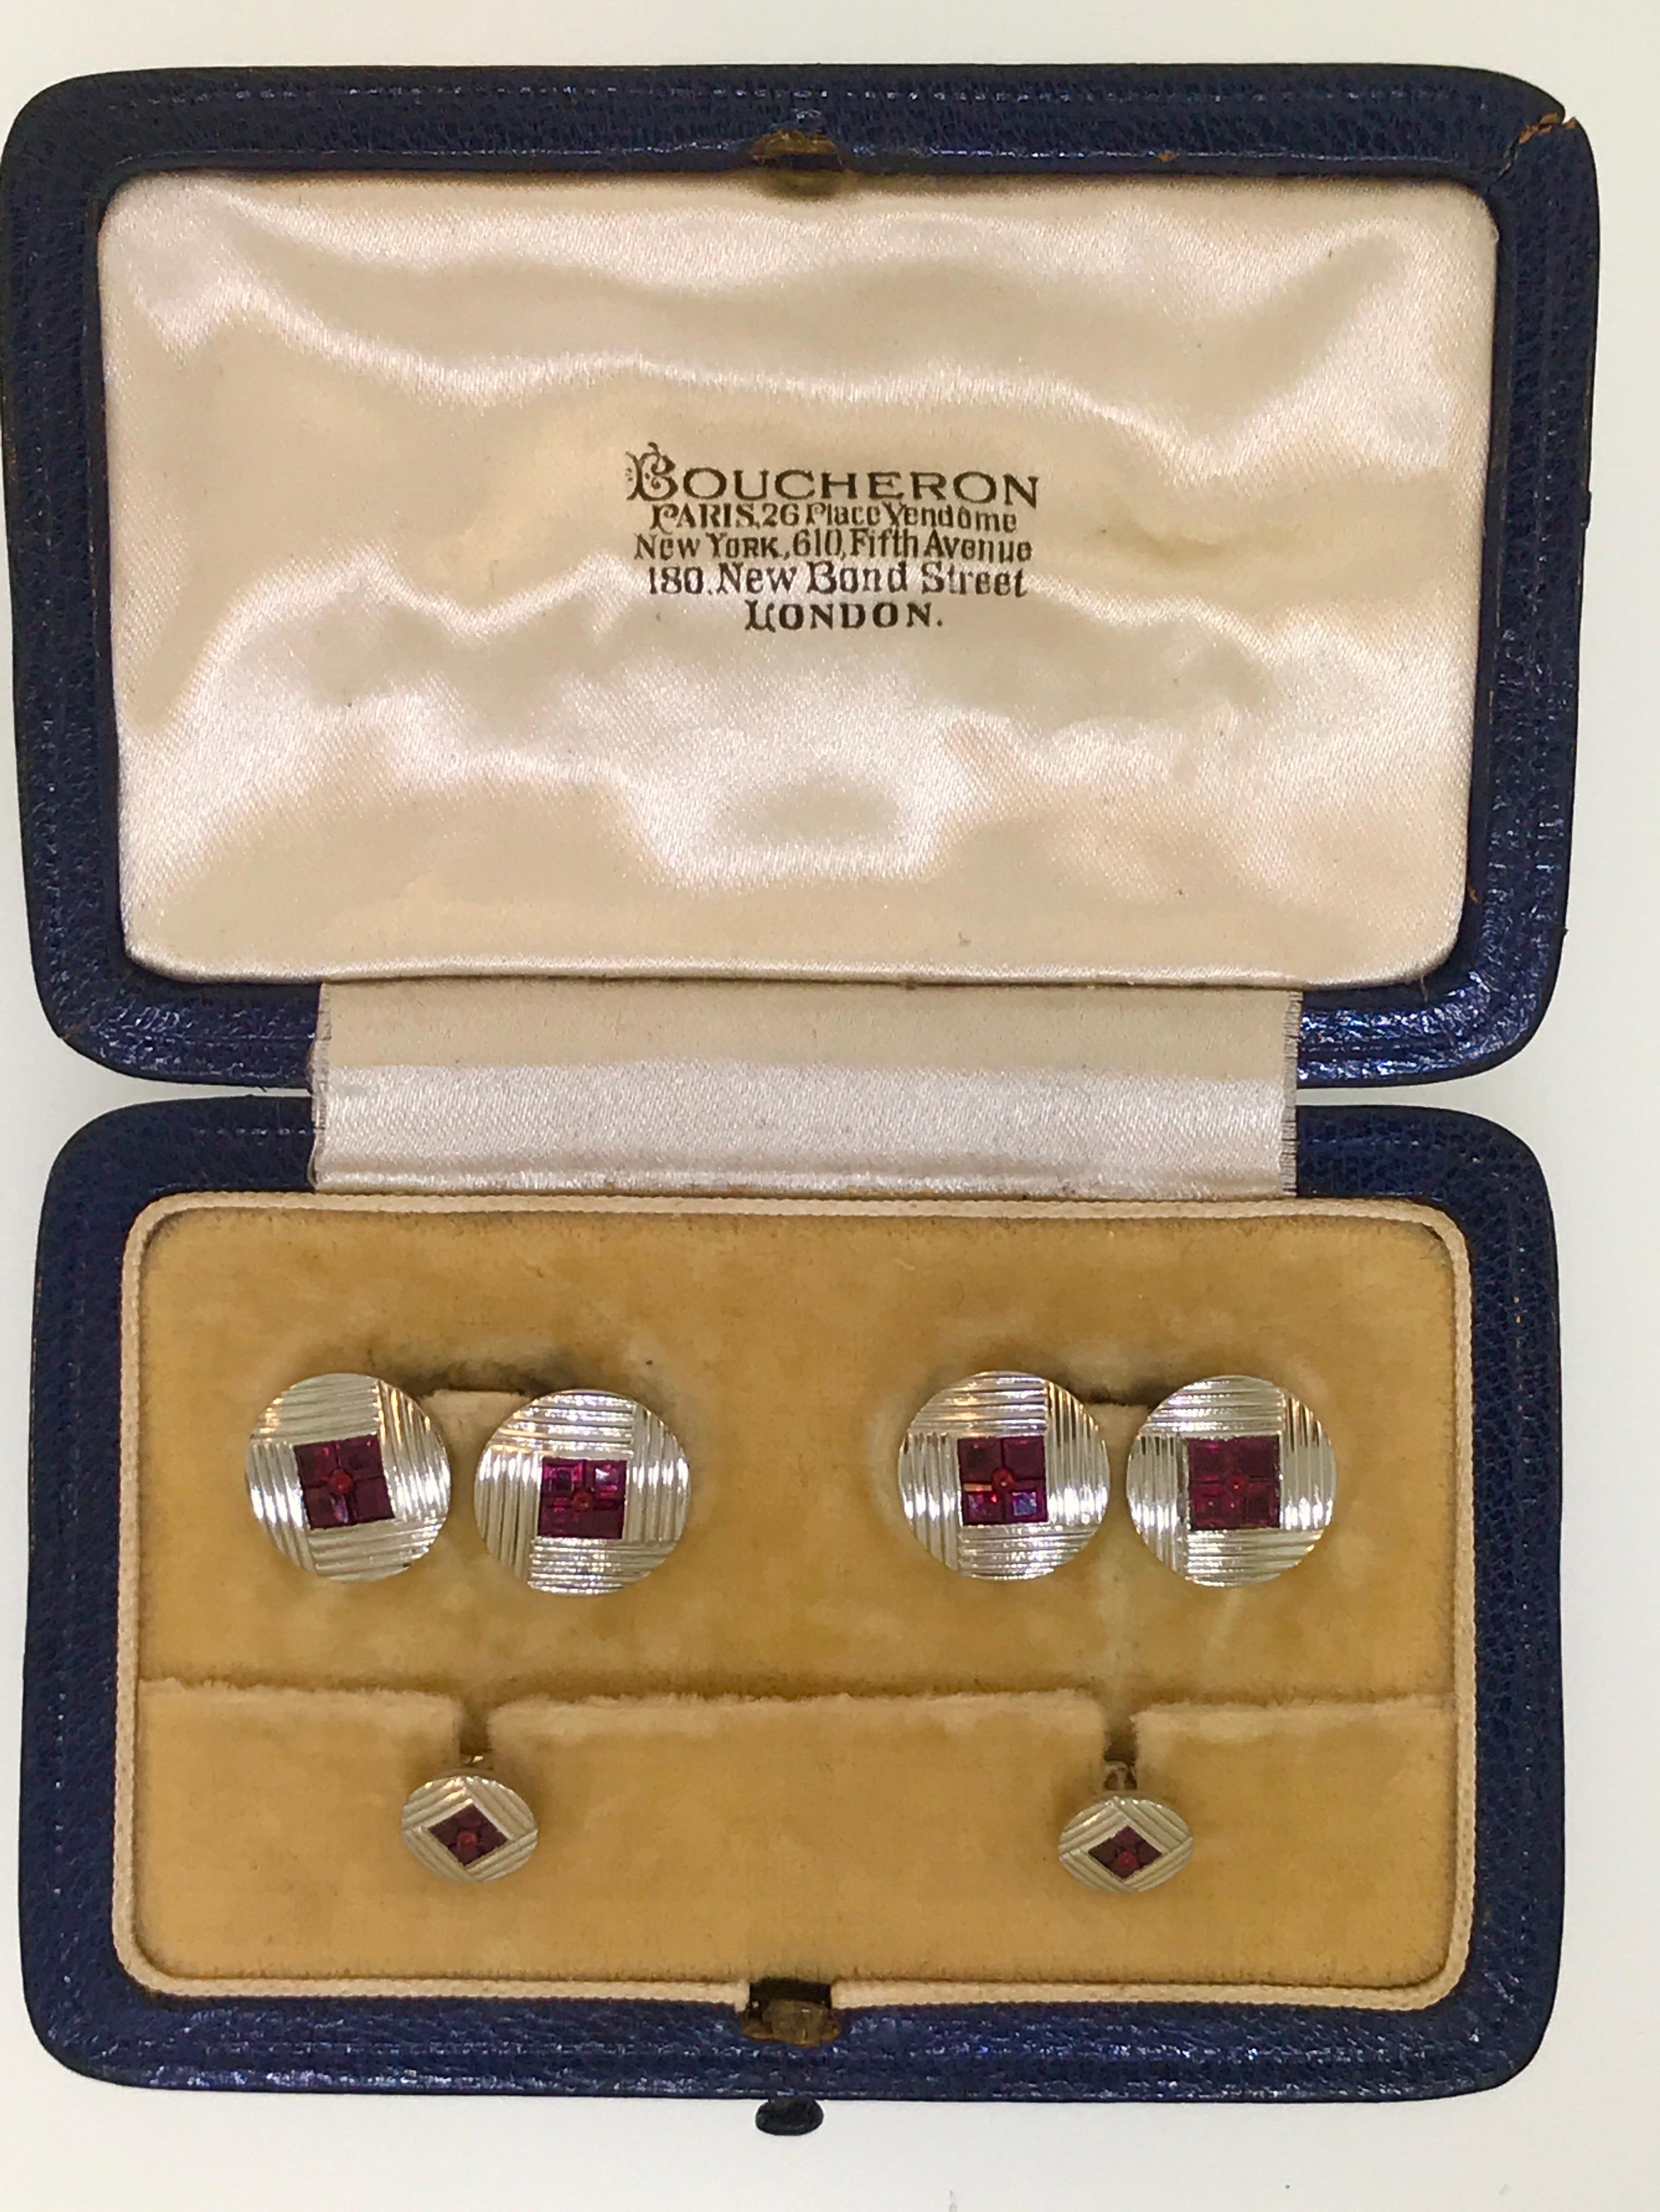 Beautiful Boucheron of Paris Platinum Ruby Cufflink and Collar Pin Set. Circa 1930.  Pure Art Deco style!  With original Box!  1 Carat of good quality French cut Rubies.  Classic Double sided cufflinks.

From an estate in London.

Vintage Art Deco